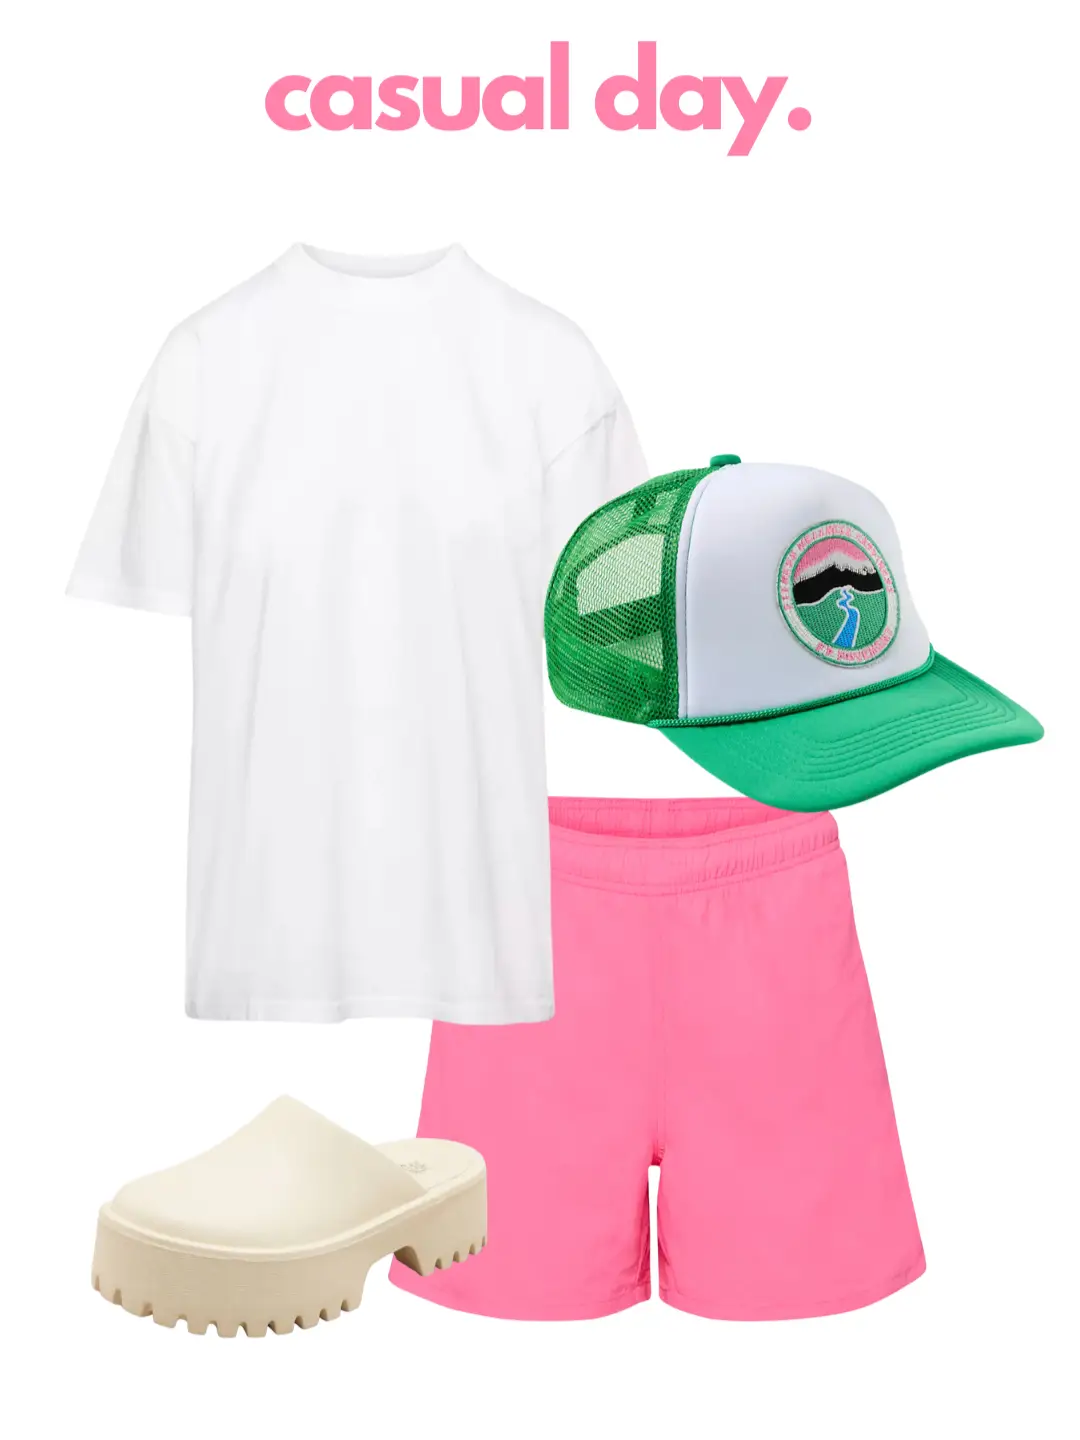 Vacation Outfits - Lemon8 Search